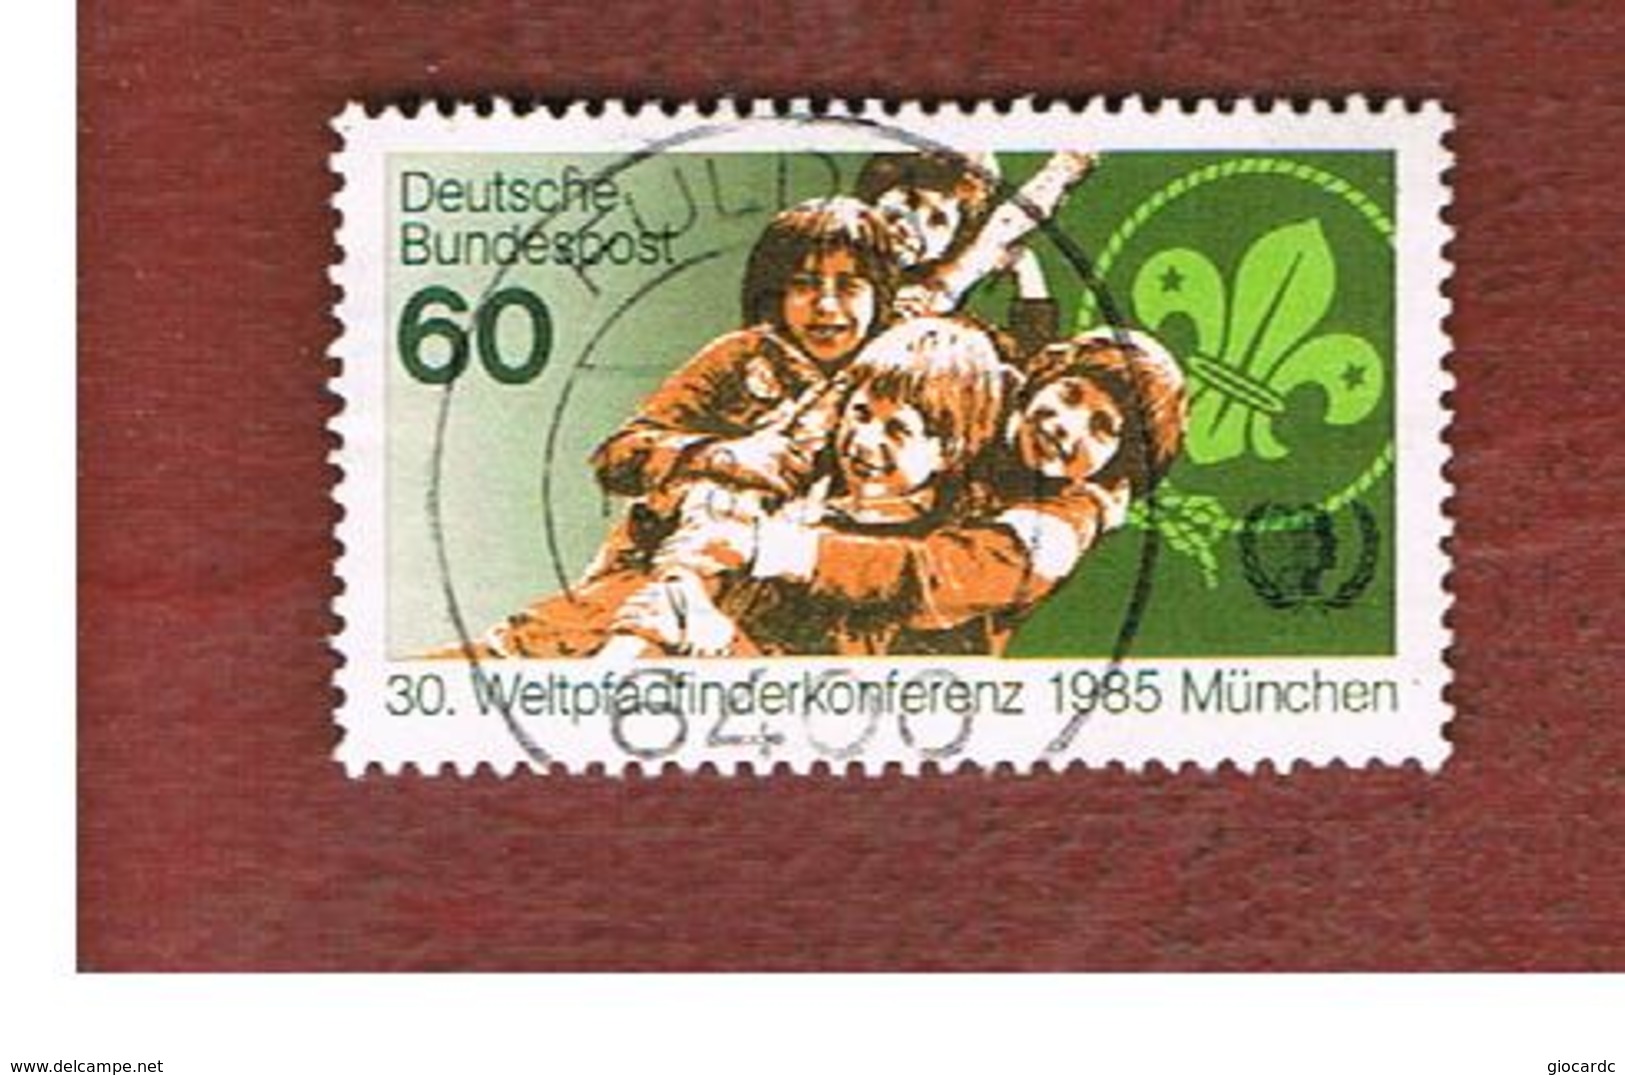 GERMANIA (GERMANY) - SG 2102 - 1985 WORLD SCOUTS CONFERENCE  -   USED - Used Stamps